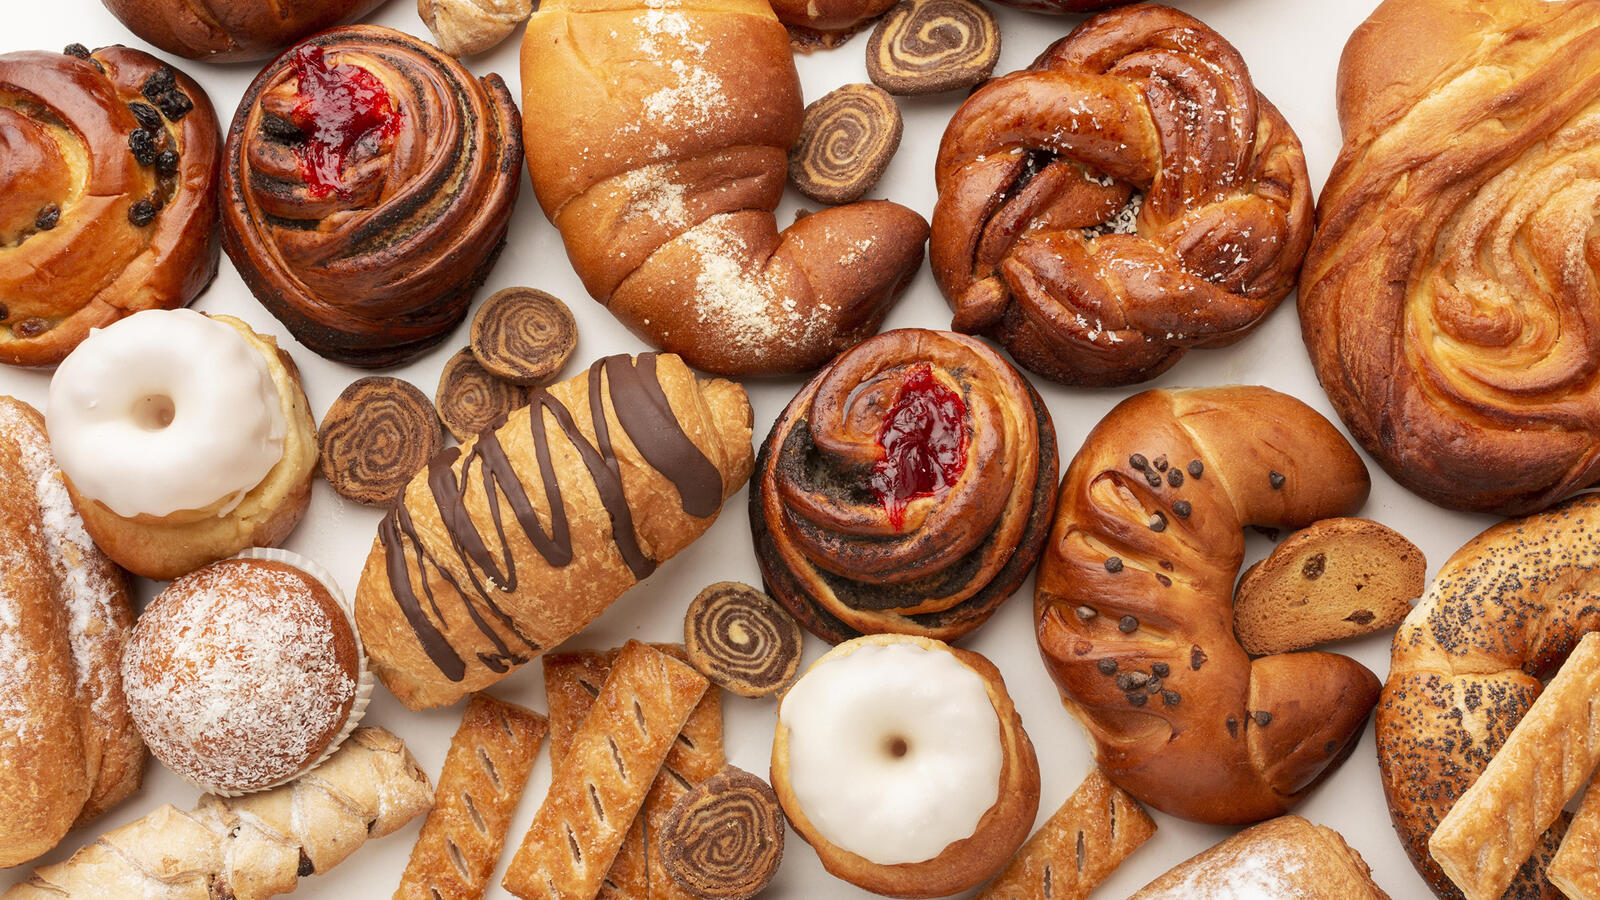 Free photo Choosing delicious baked goods